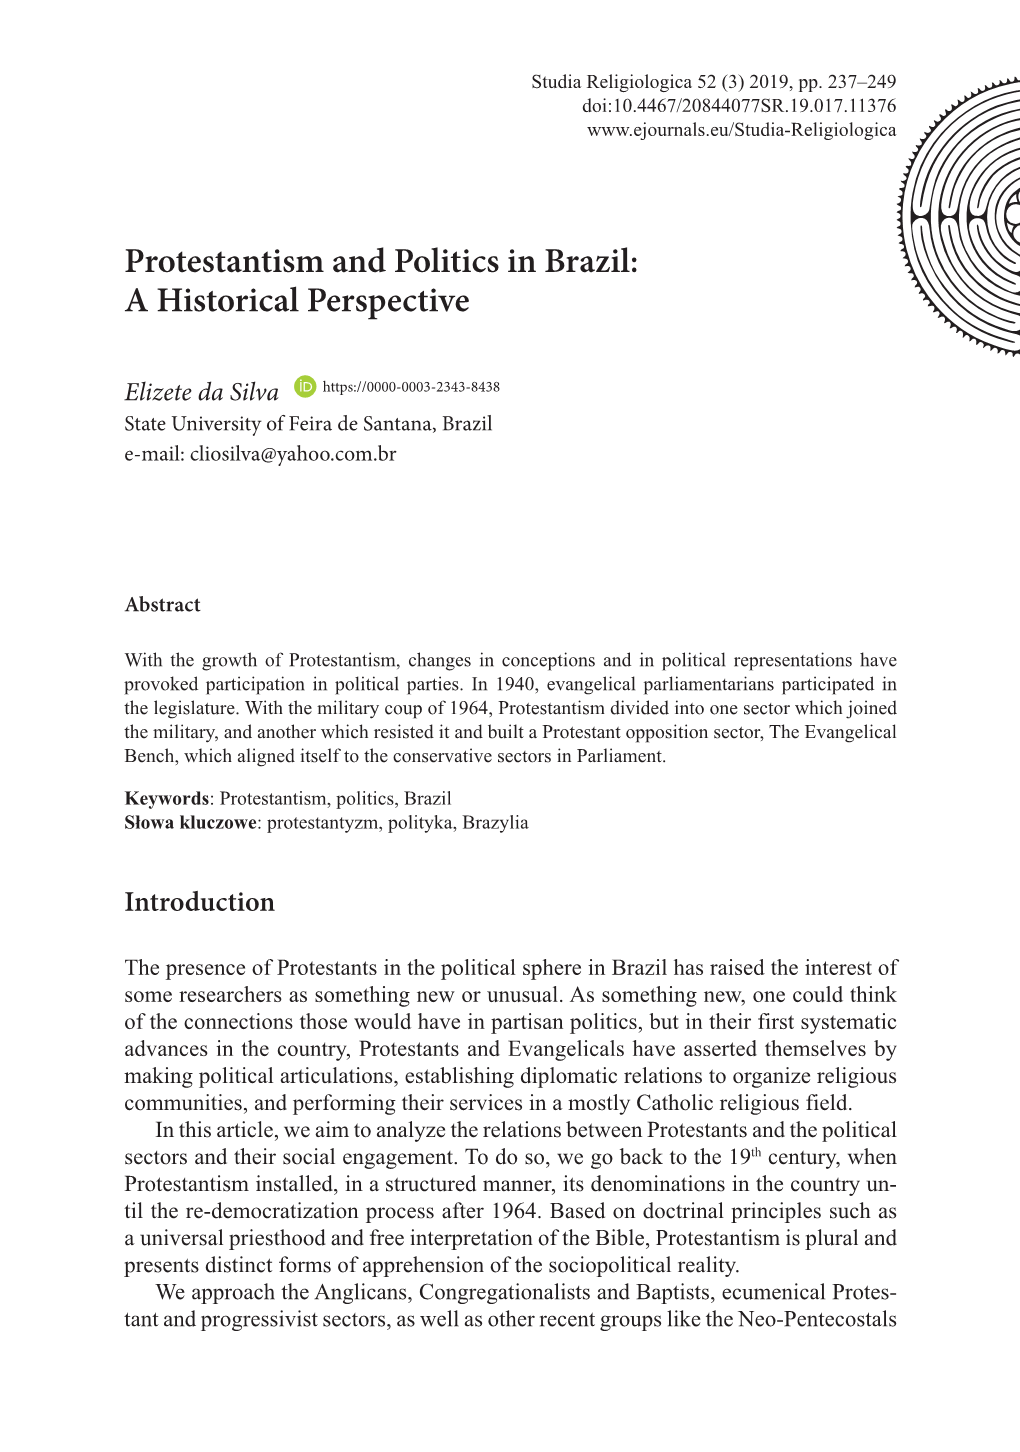 Protestantism and Politics in Brazil: a Historical Perspective